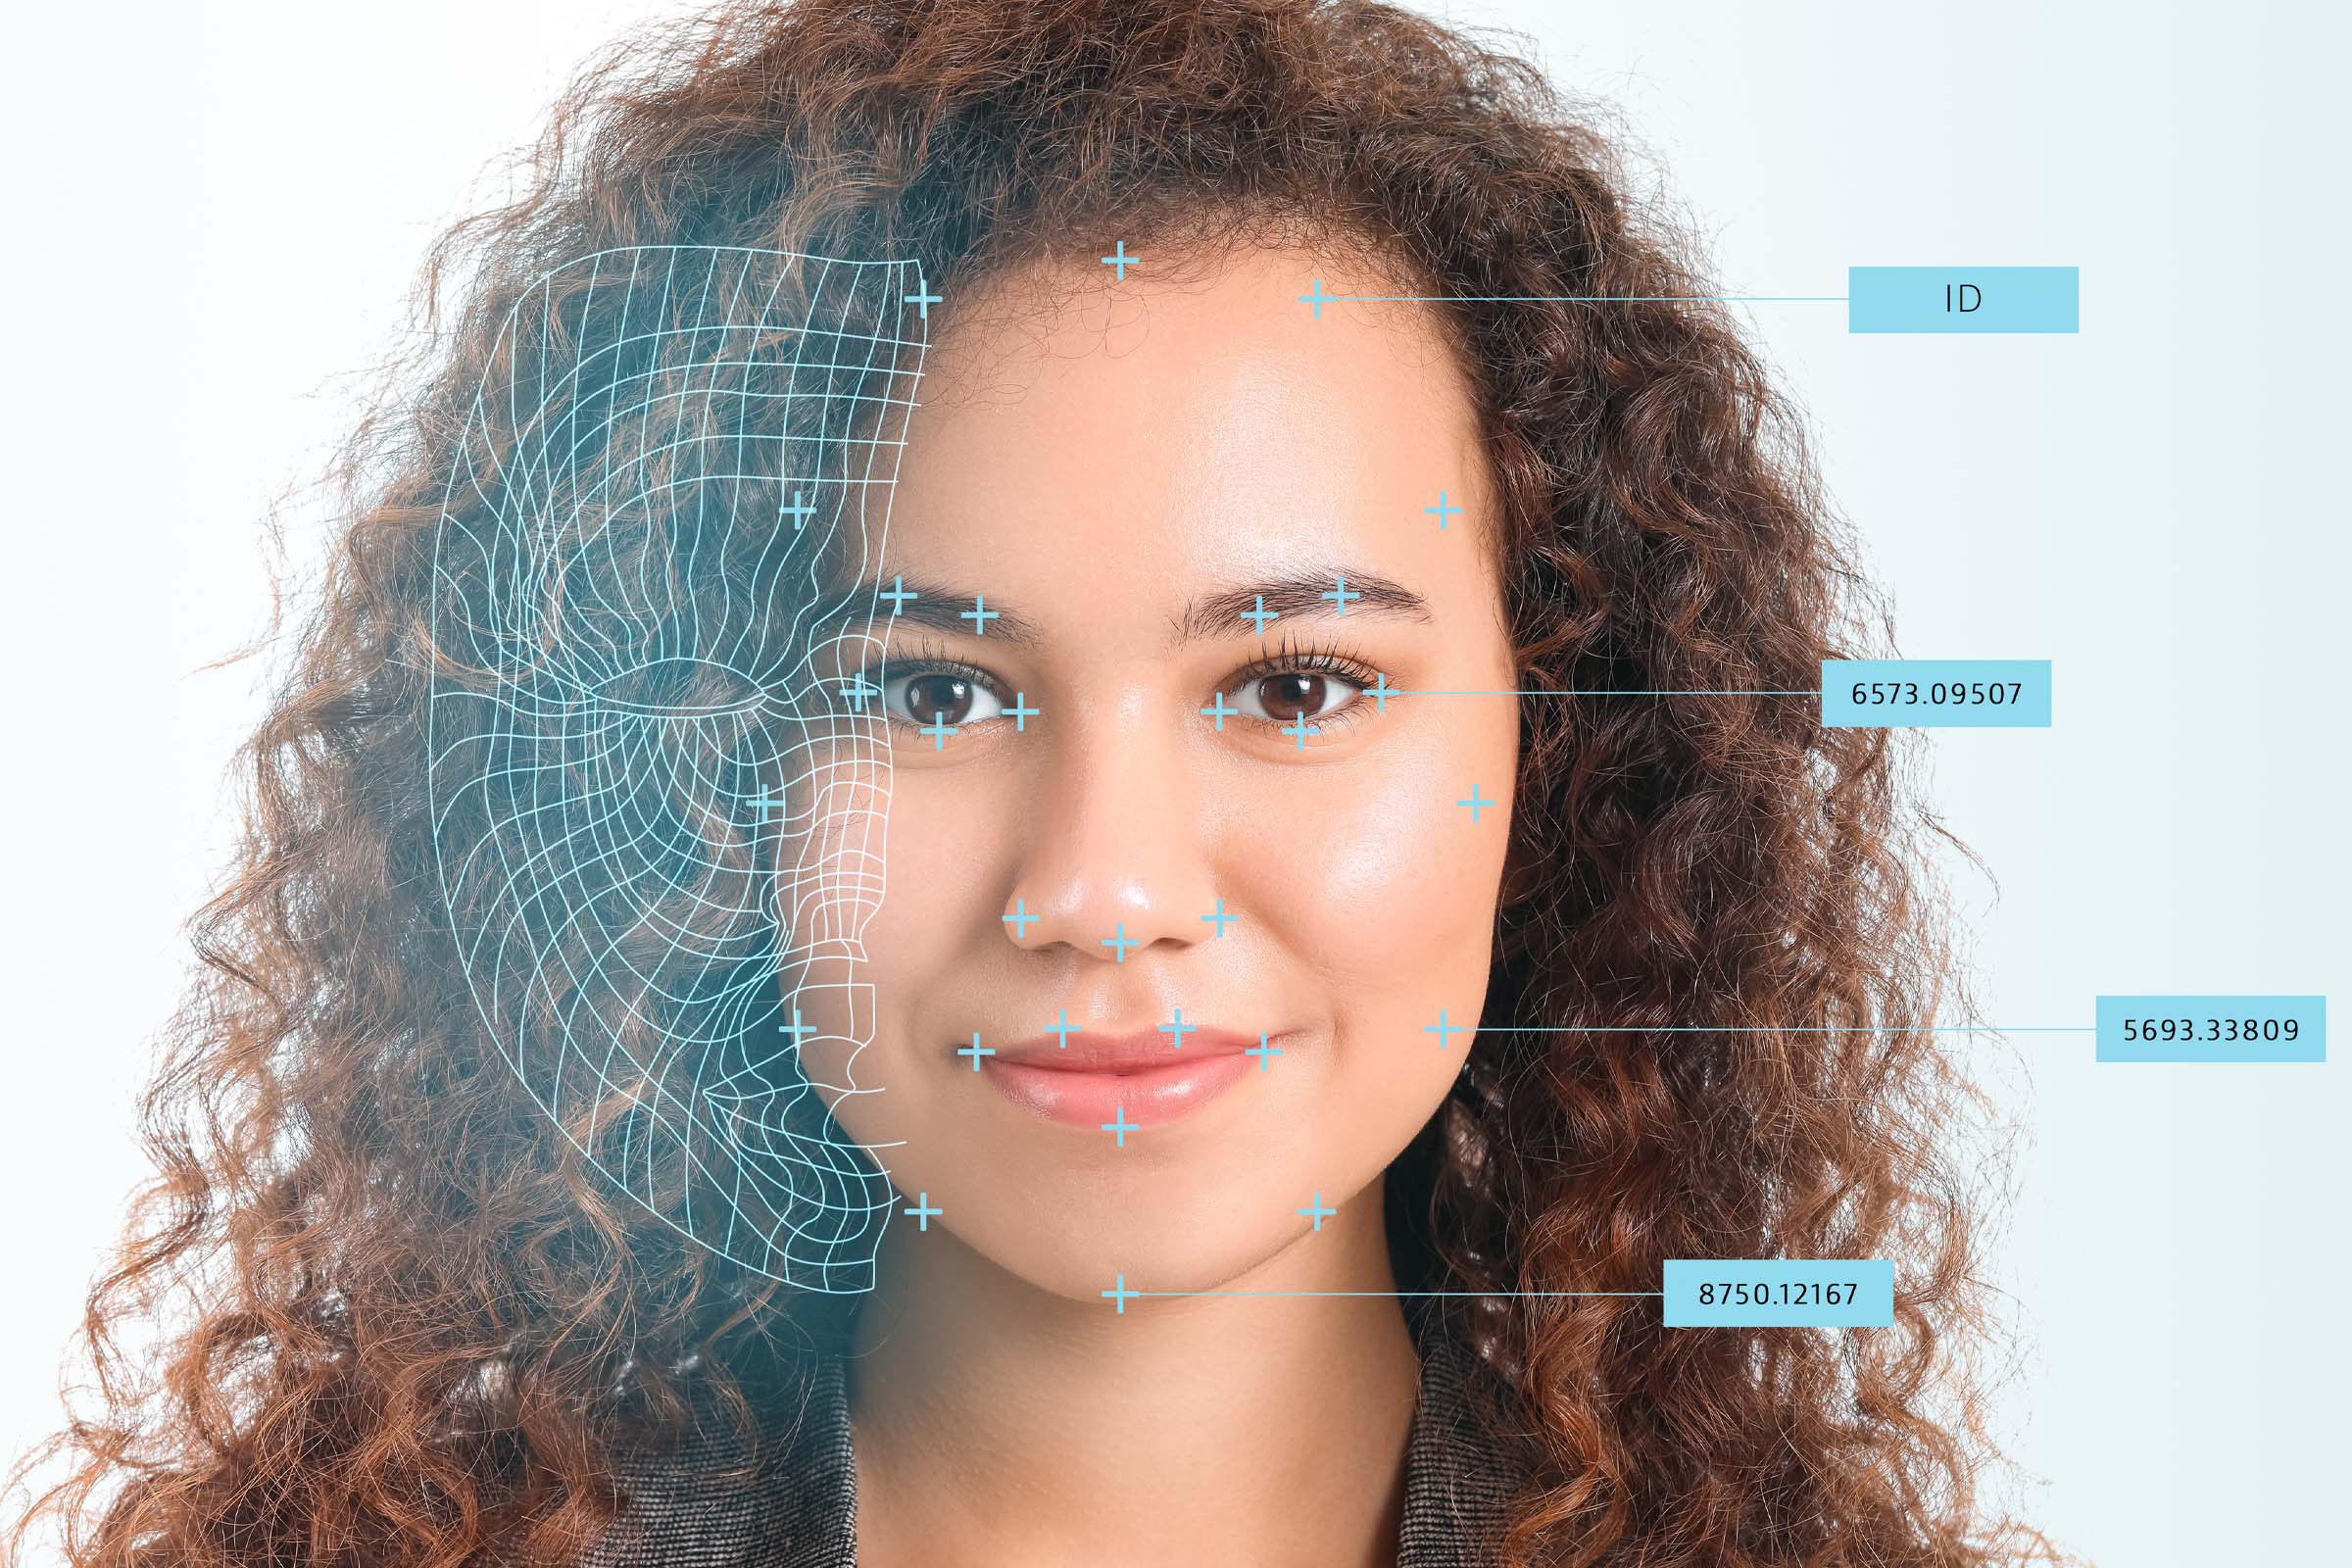 Facial recognition with Cautroma Business Management Systems